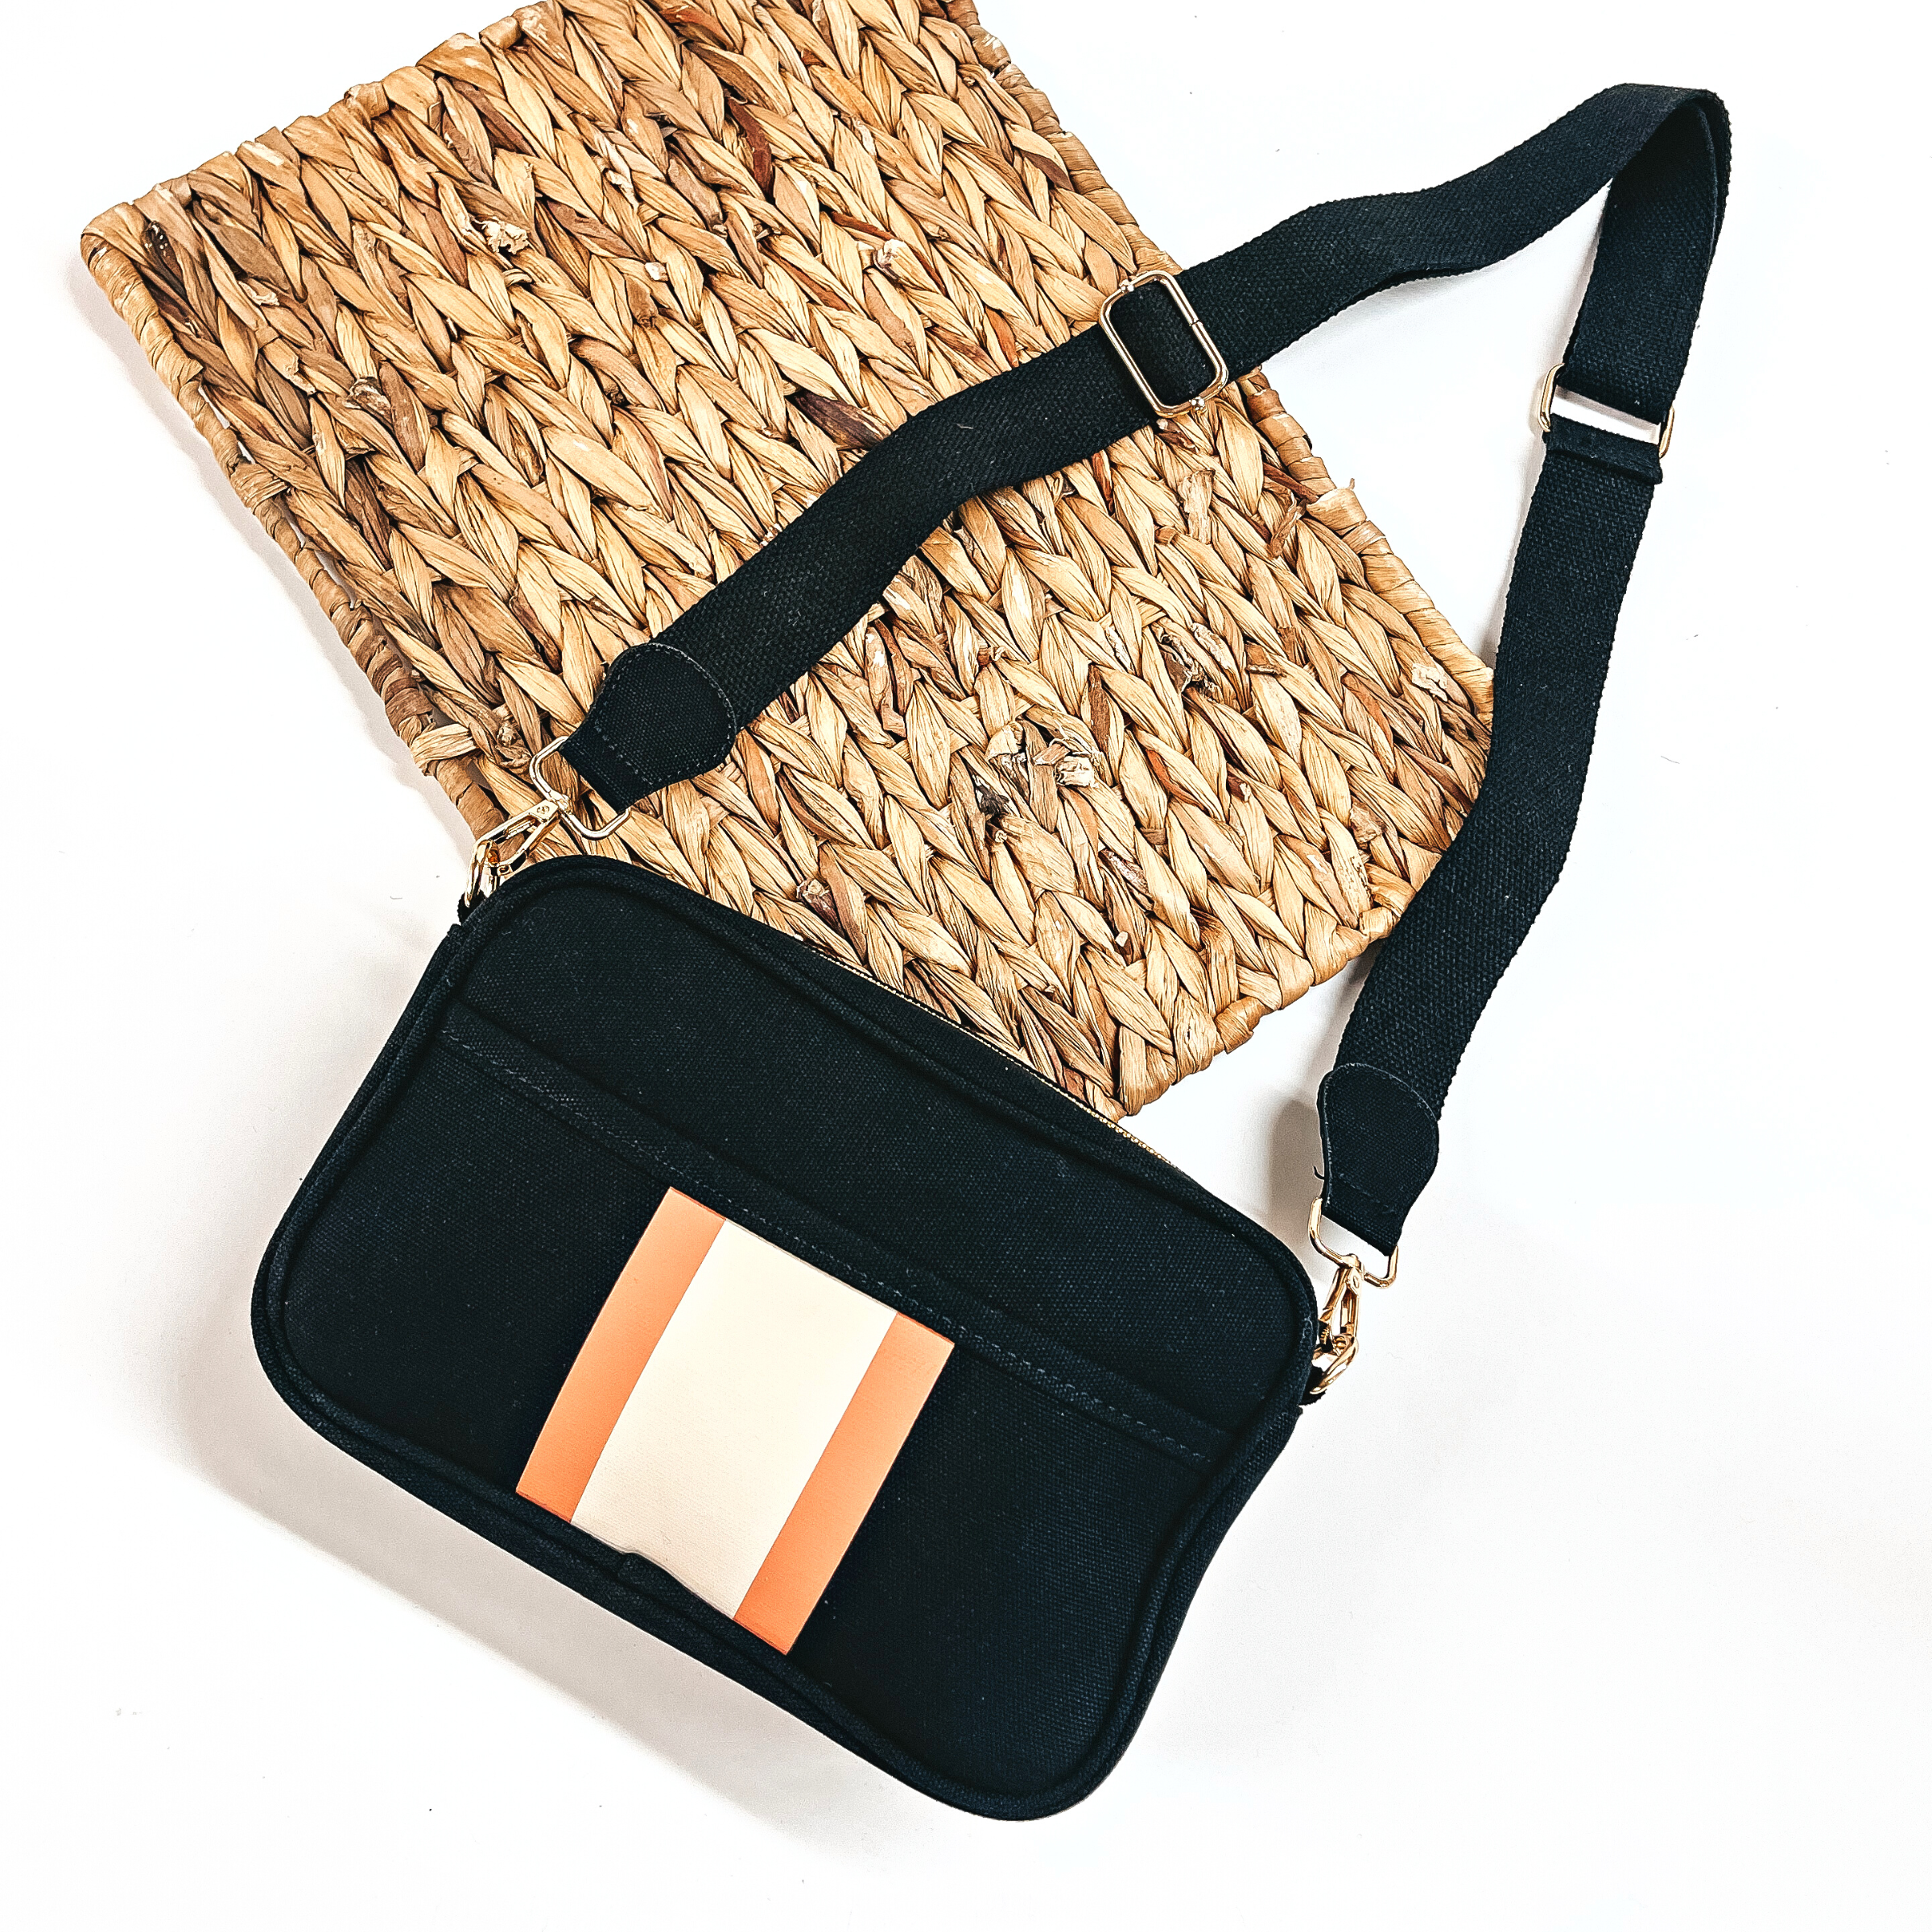 Special Treat Multicolored Striped Crossbody Bag in Black - Giddy Up Glamour Boutique